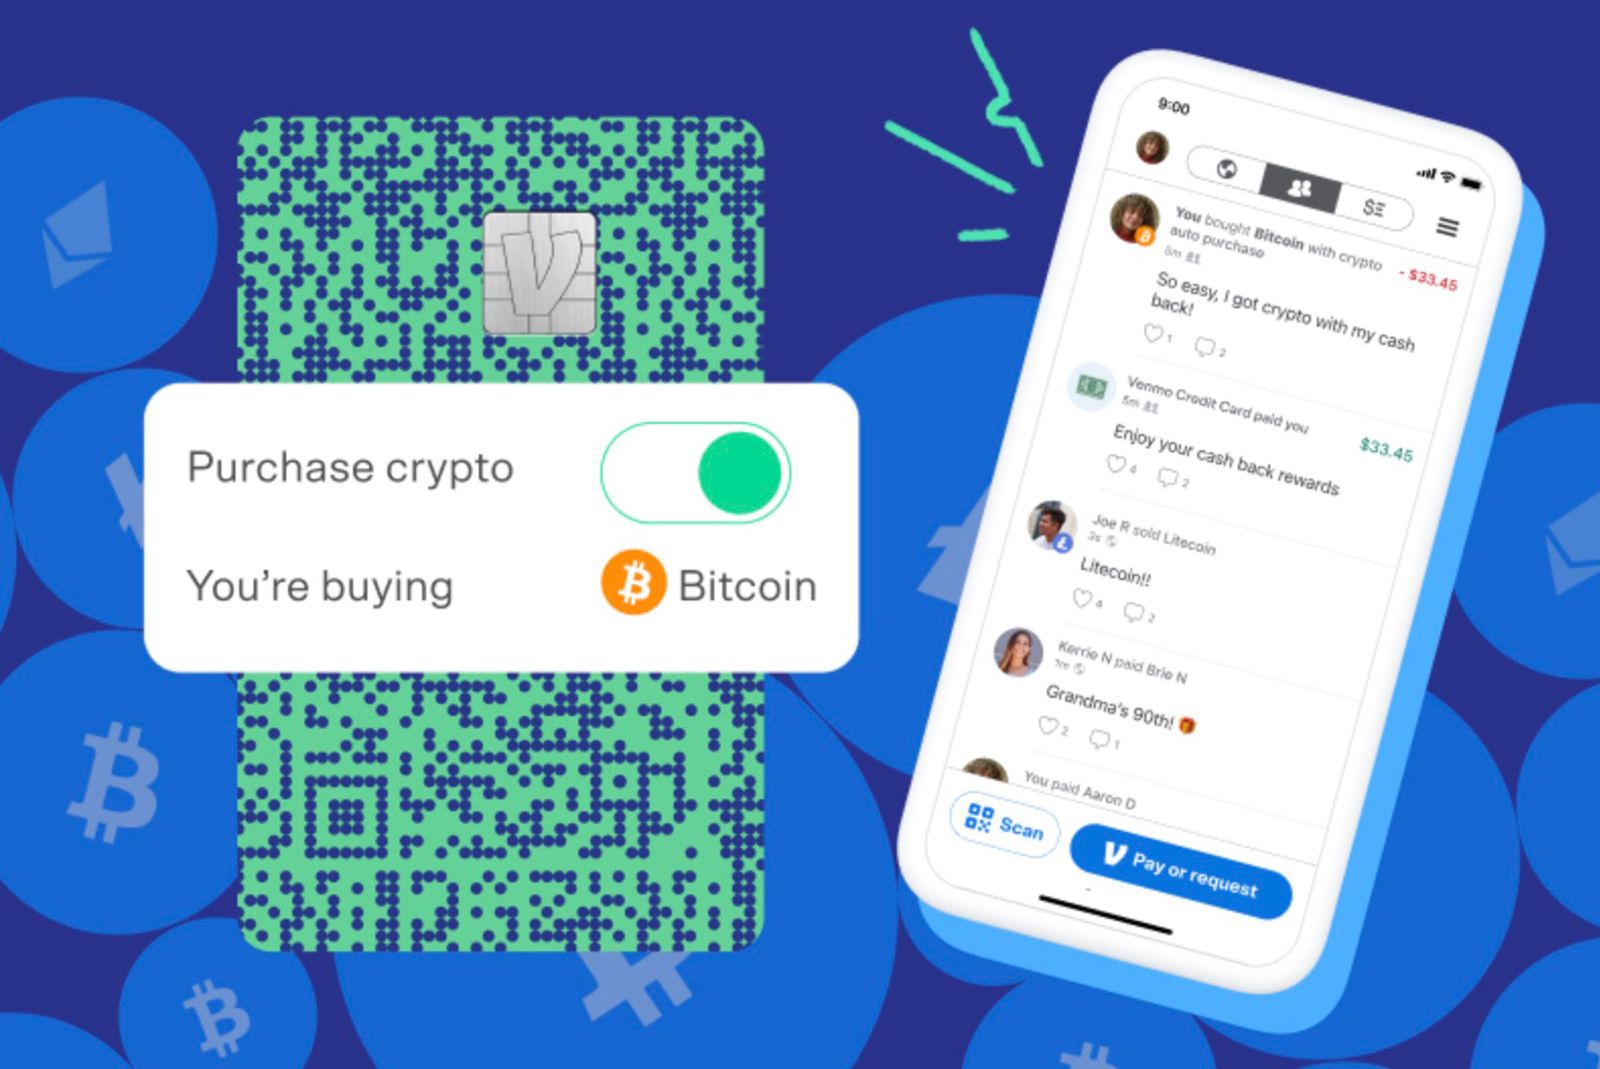 How to turn your Venmo credit card cash back rewards into cryptocurrency photo 1